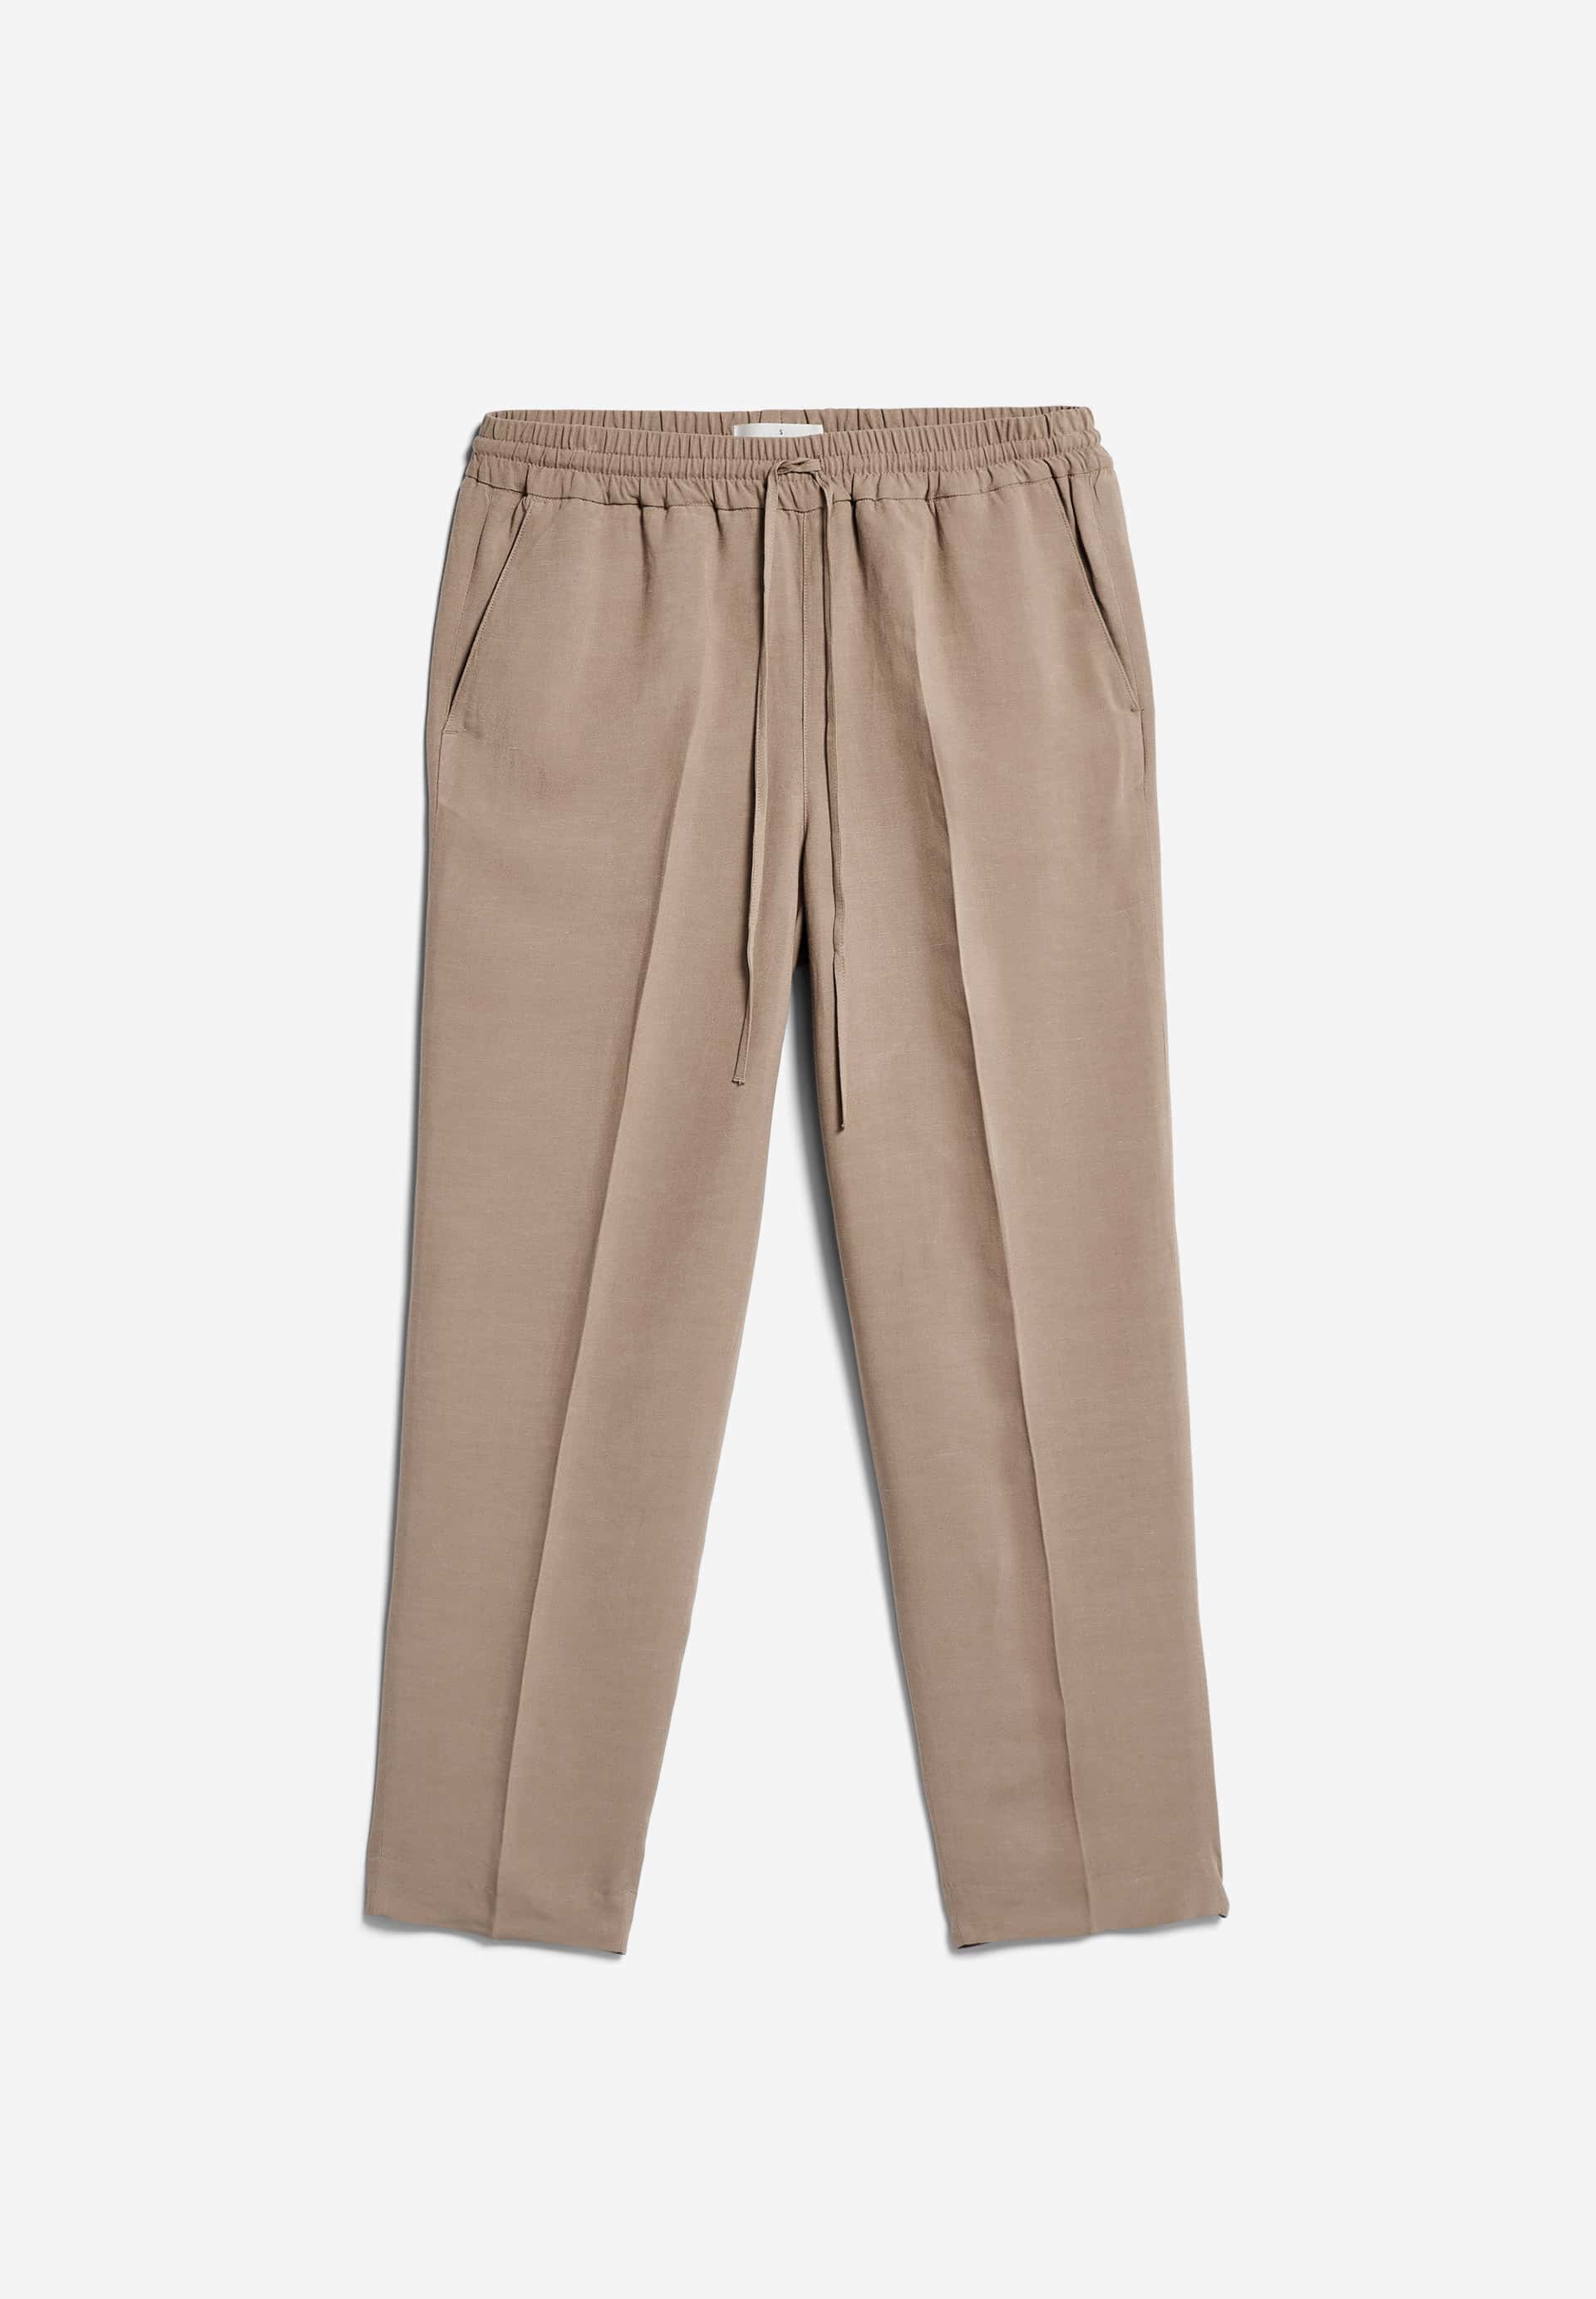 KAADIA TAPERED LINO Woven Pants made of Linen-Mix